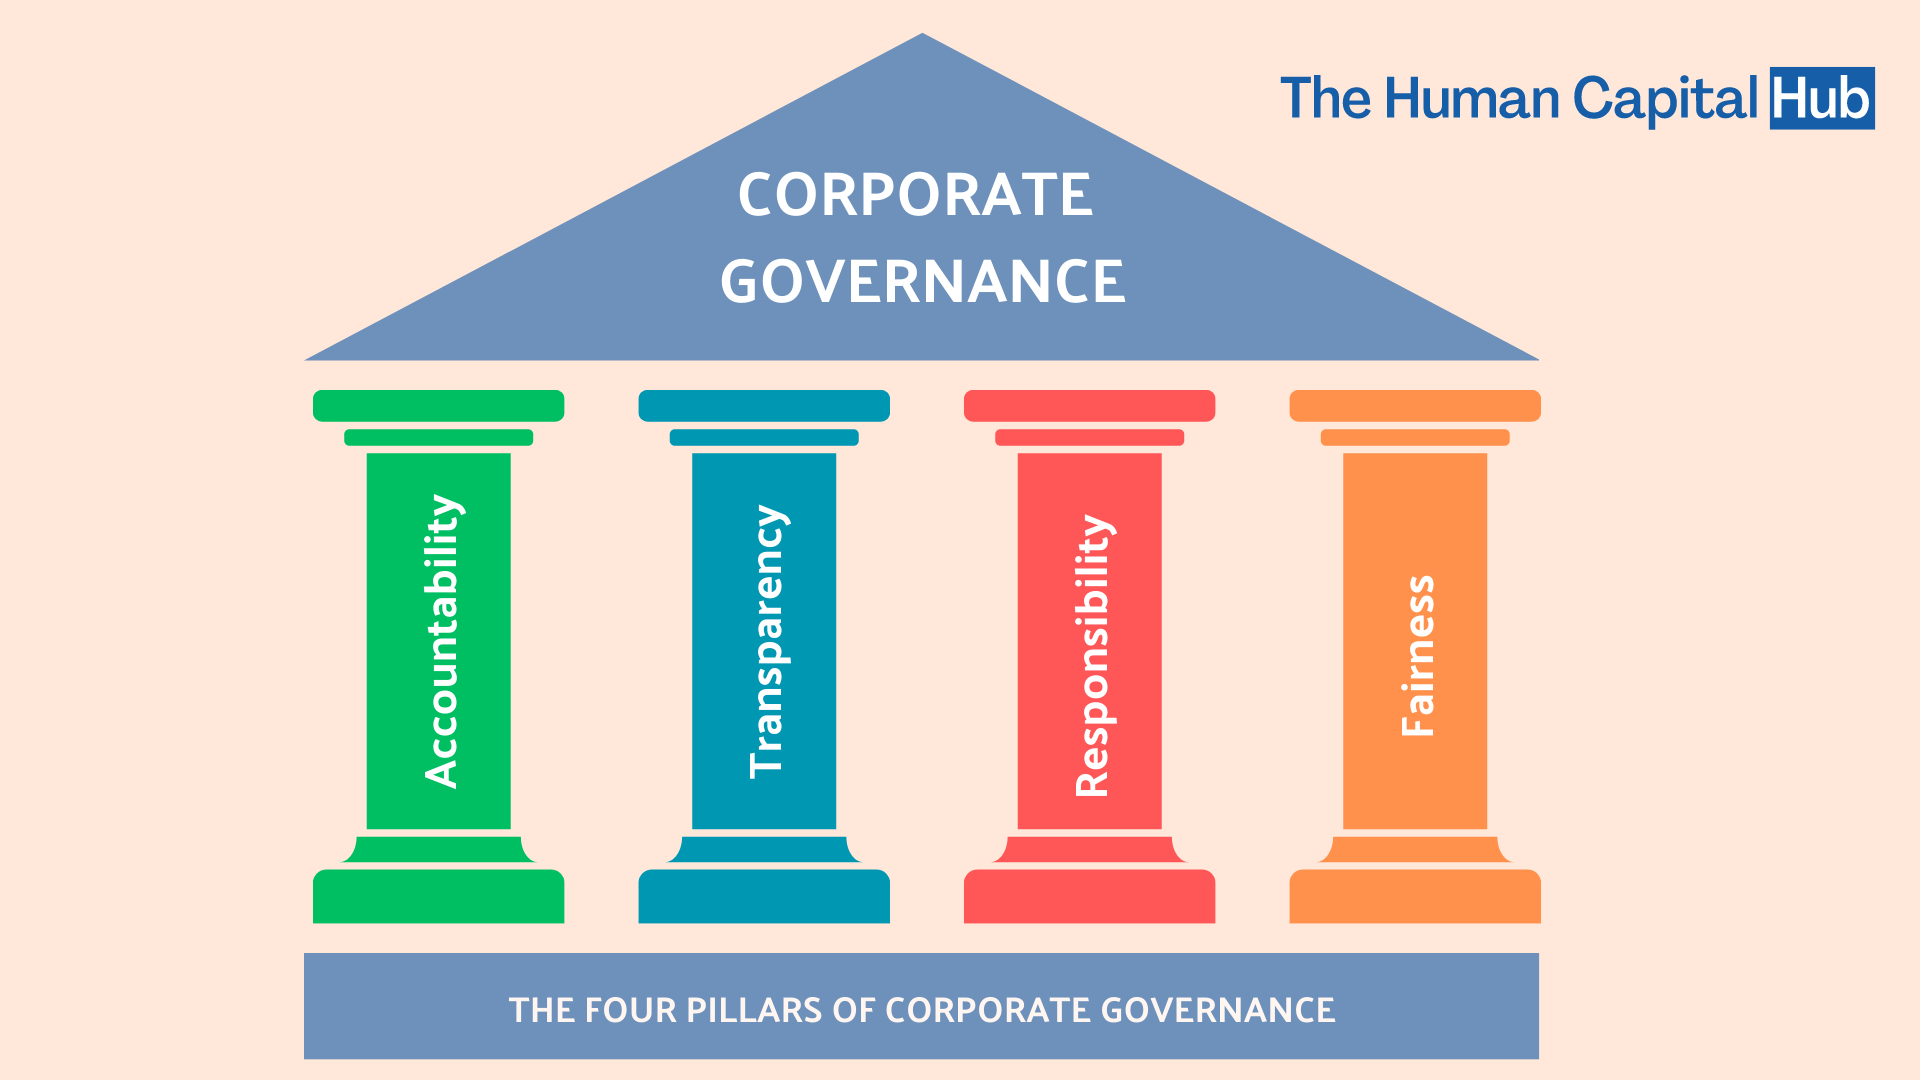 corporate governance research topics